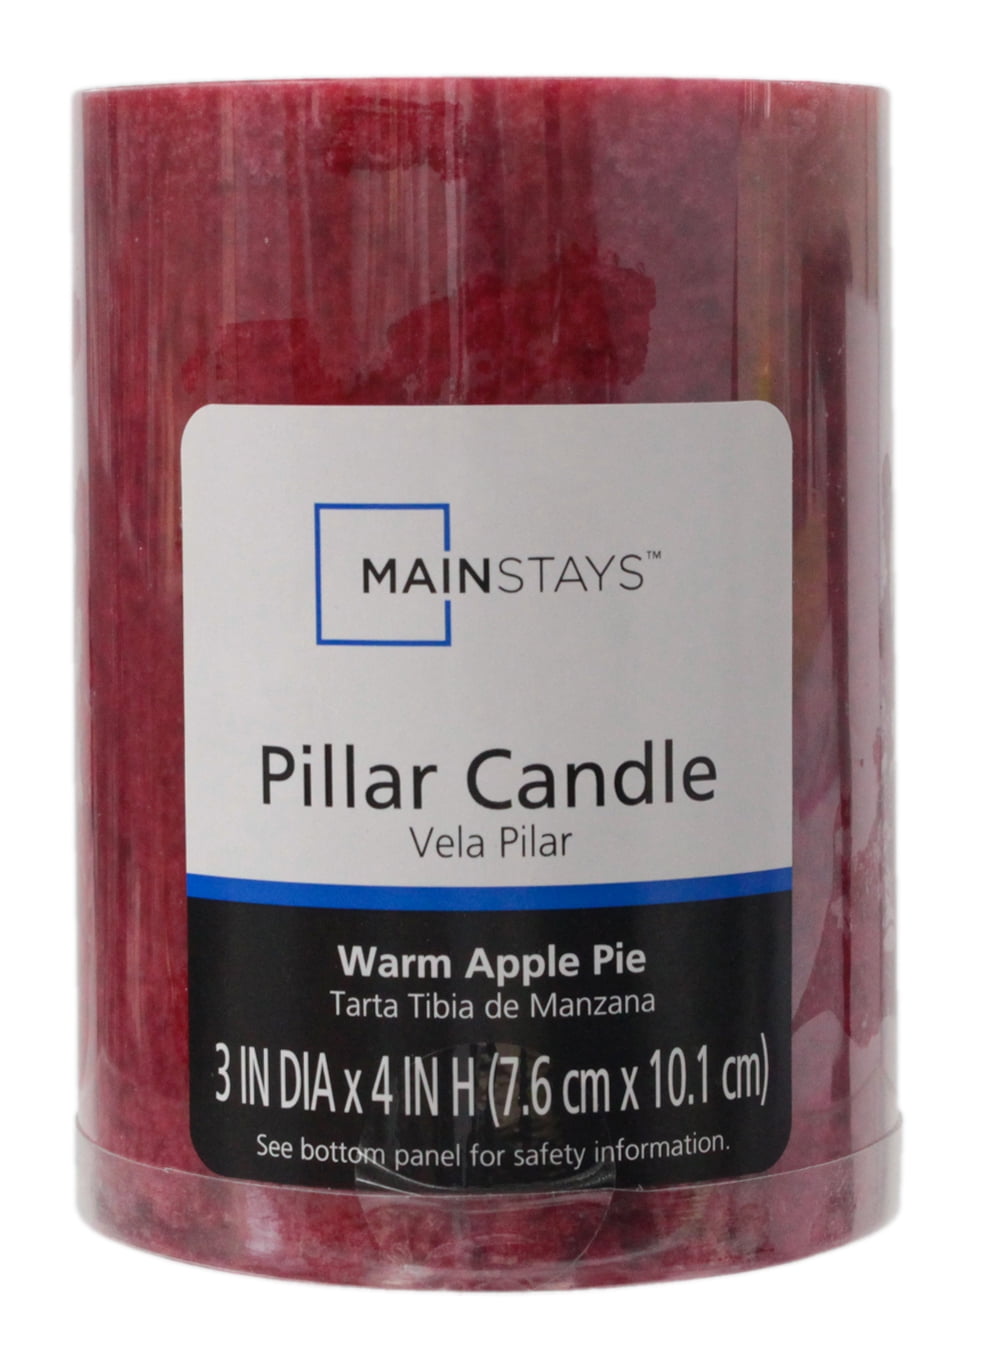 Mainstays Scented Mottled Pillar Candle, 3 x 4 inches, Red, Warm Apple Pie